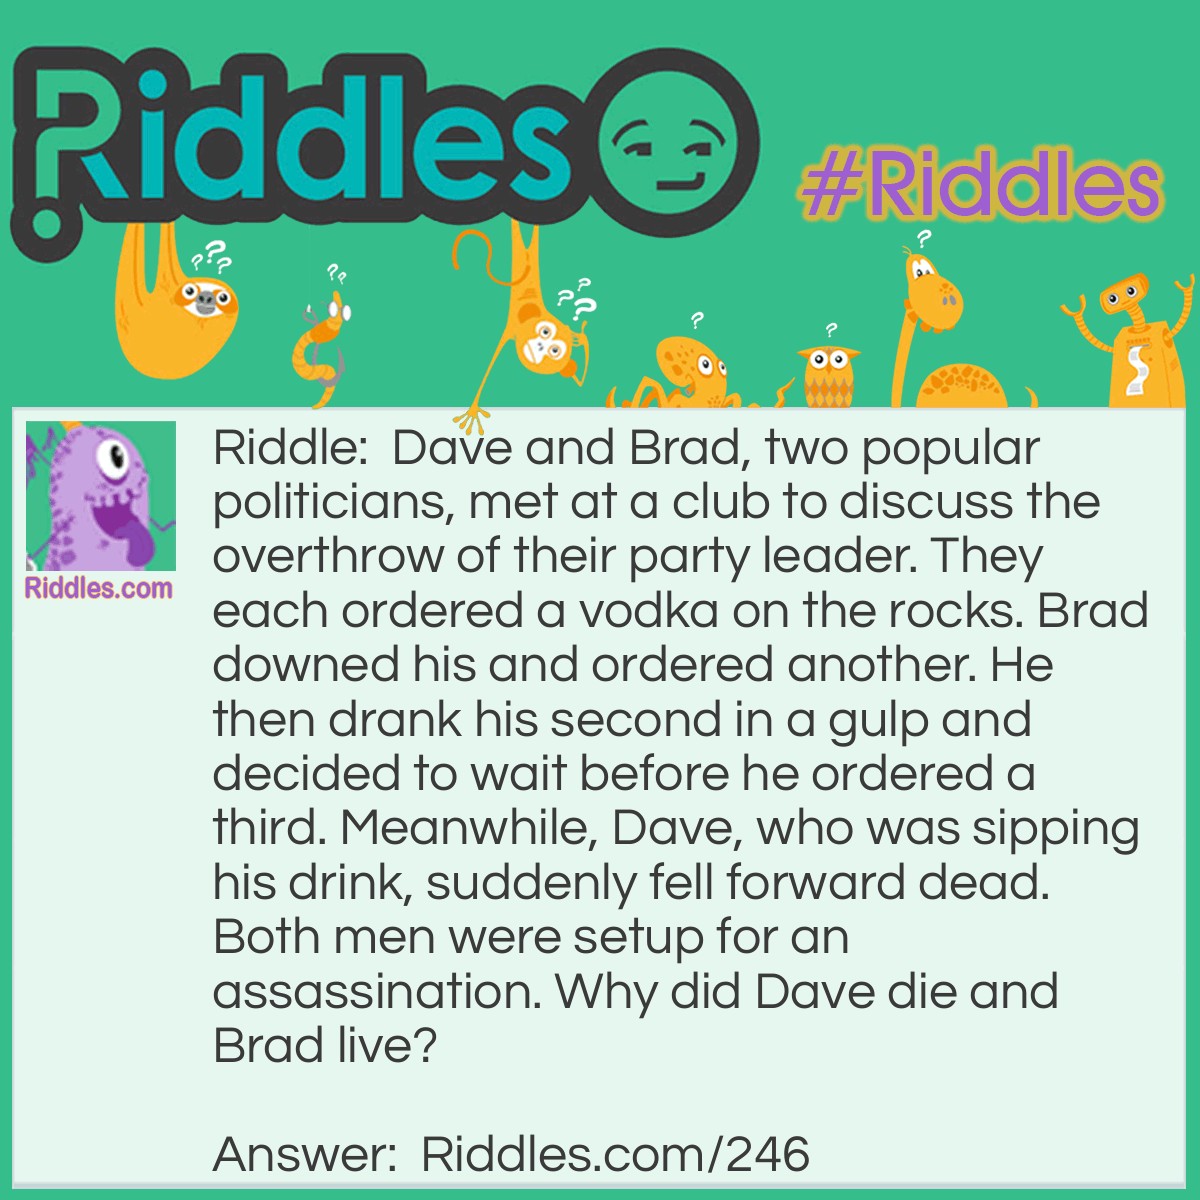 Riddle: Dave and Brad, two popular politicians, met at a club to discuss the overthrow of their party leader. They each ordered a vodka on the rocks. Brad downed his and ordered another. He then drank his second in a gulp and decided to wait before he ordered a third. Meanwhile, Dave, who was sipping his drink, suddenly fell forward dead. Both men were setup for an assassination. Why did Dave die and Brad live? Answer: Both Dave and Brad were given drinks with poisoned ice cubes. Brad drank his drinks so quickly that the ice didn't have time to melt and release the poison.